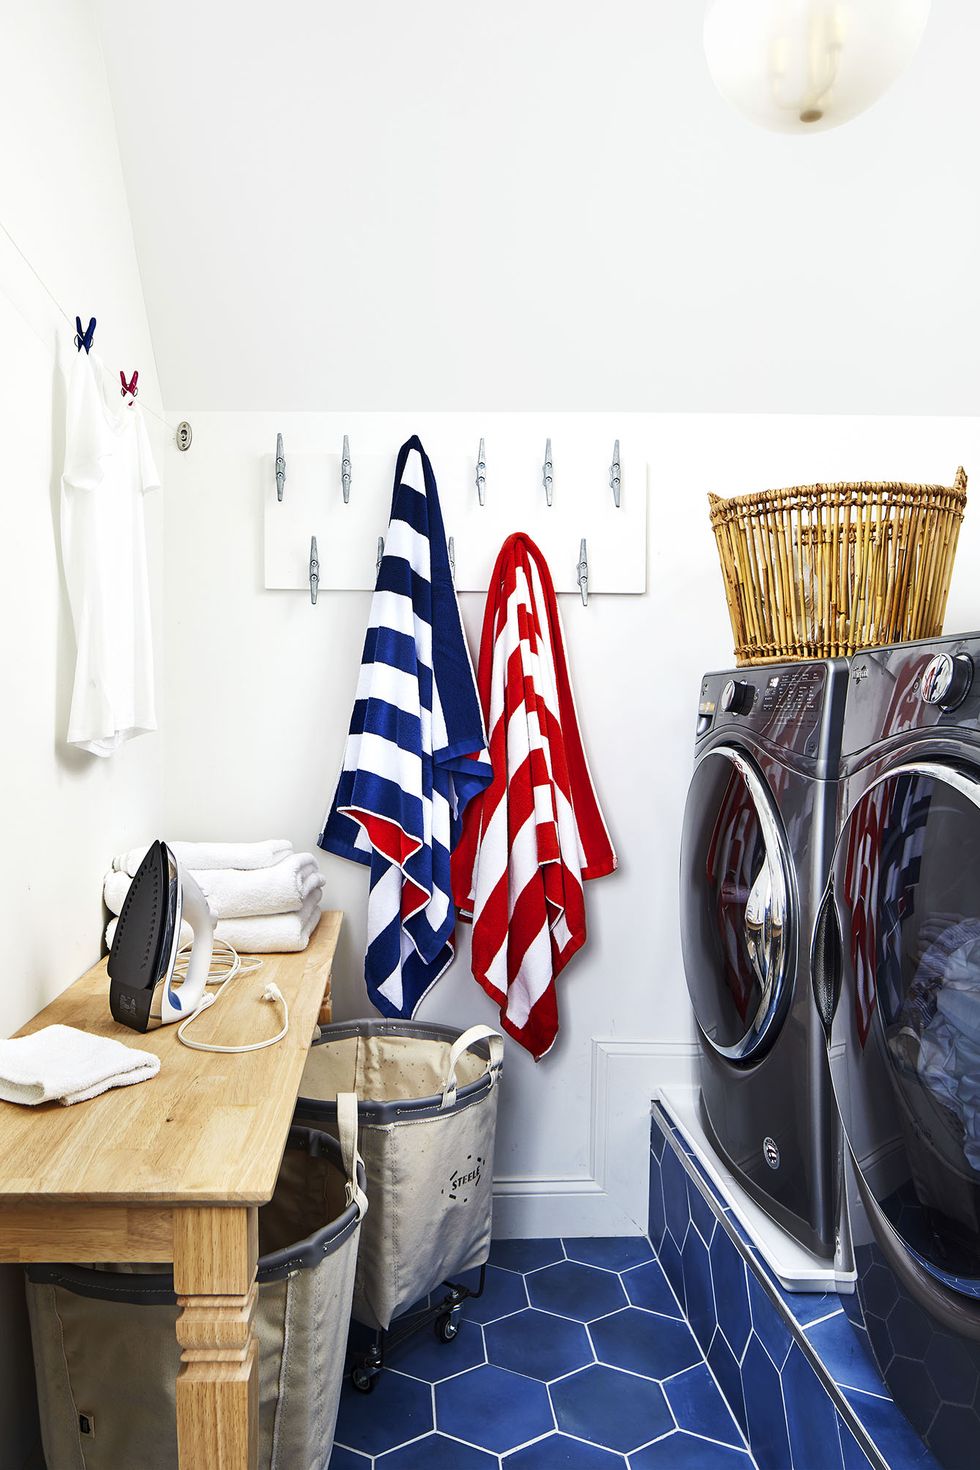 Laundry Room Tips: Making the Most of a Small Space - Prime Storage